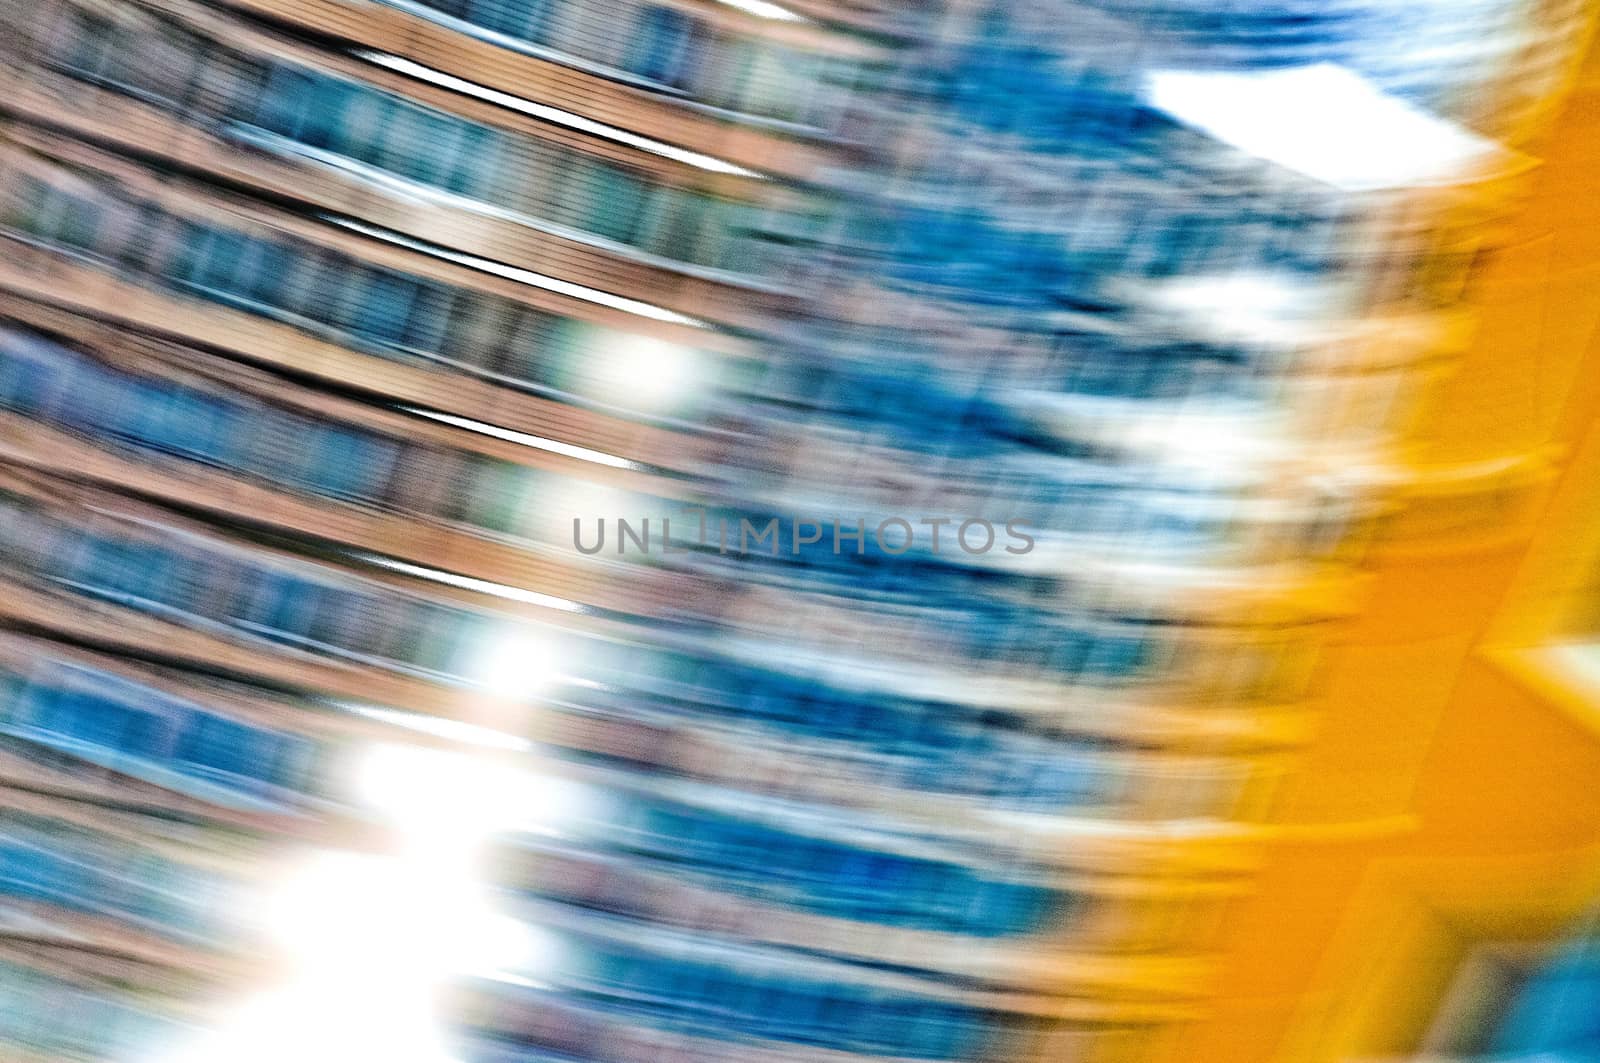 A blue and orange abstract photographic view of buildings in movement in the city, with a grain reticulation texture effect